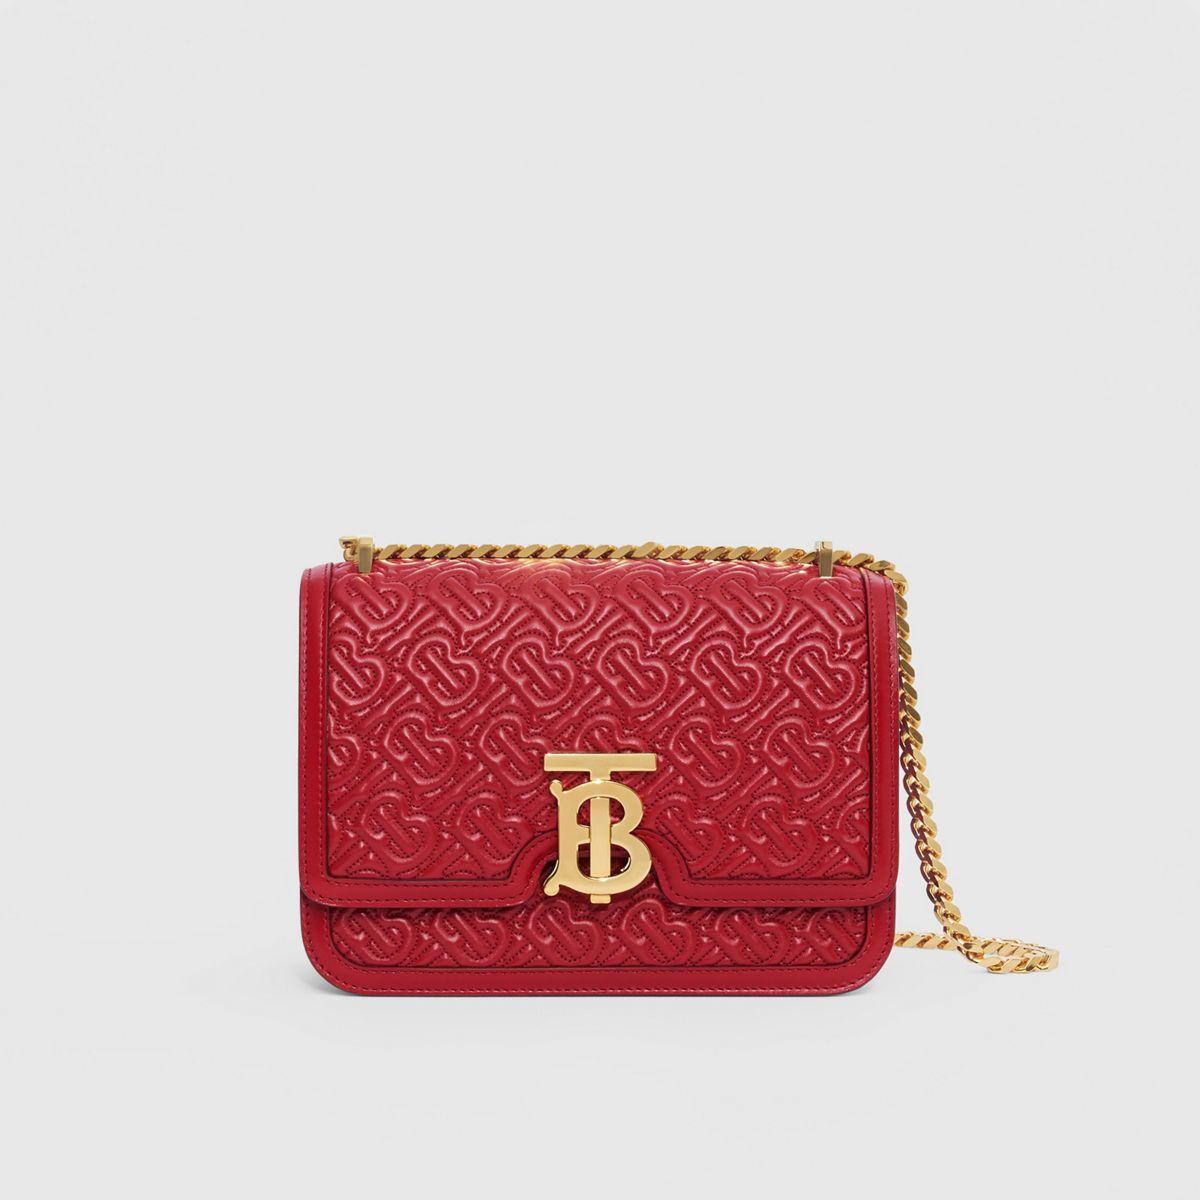 Burberry Small Quilted Monogram Lambskin Tb Bag in Red